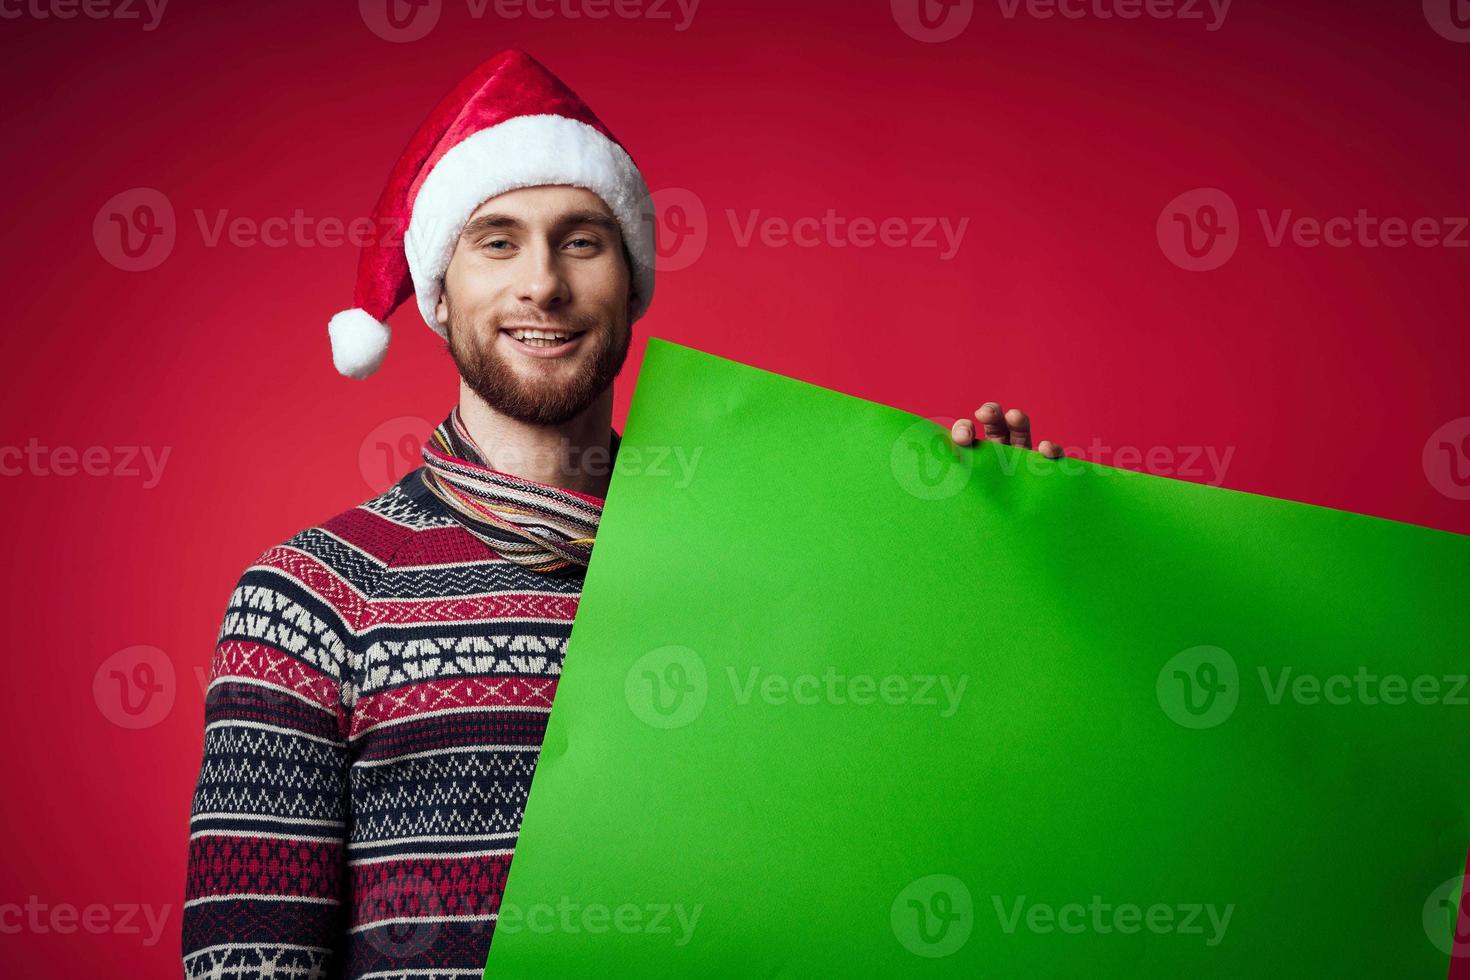 Cheerful man in a christmas hat with green mockup red background photo